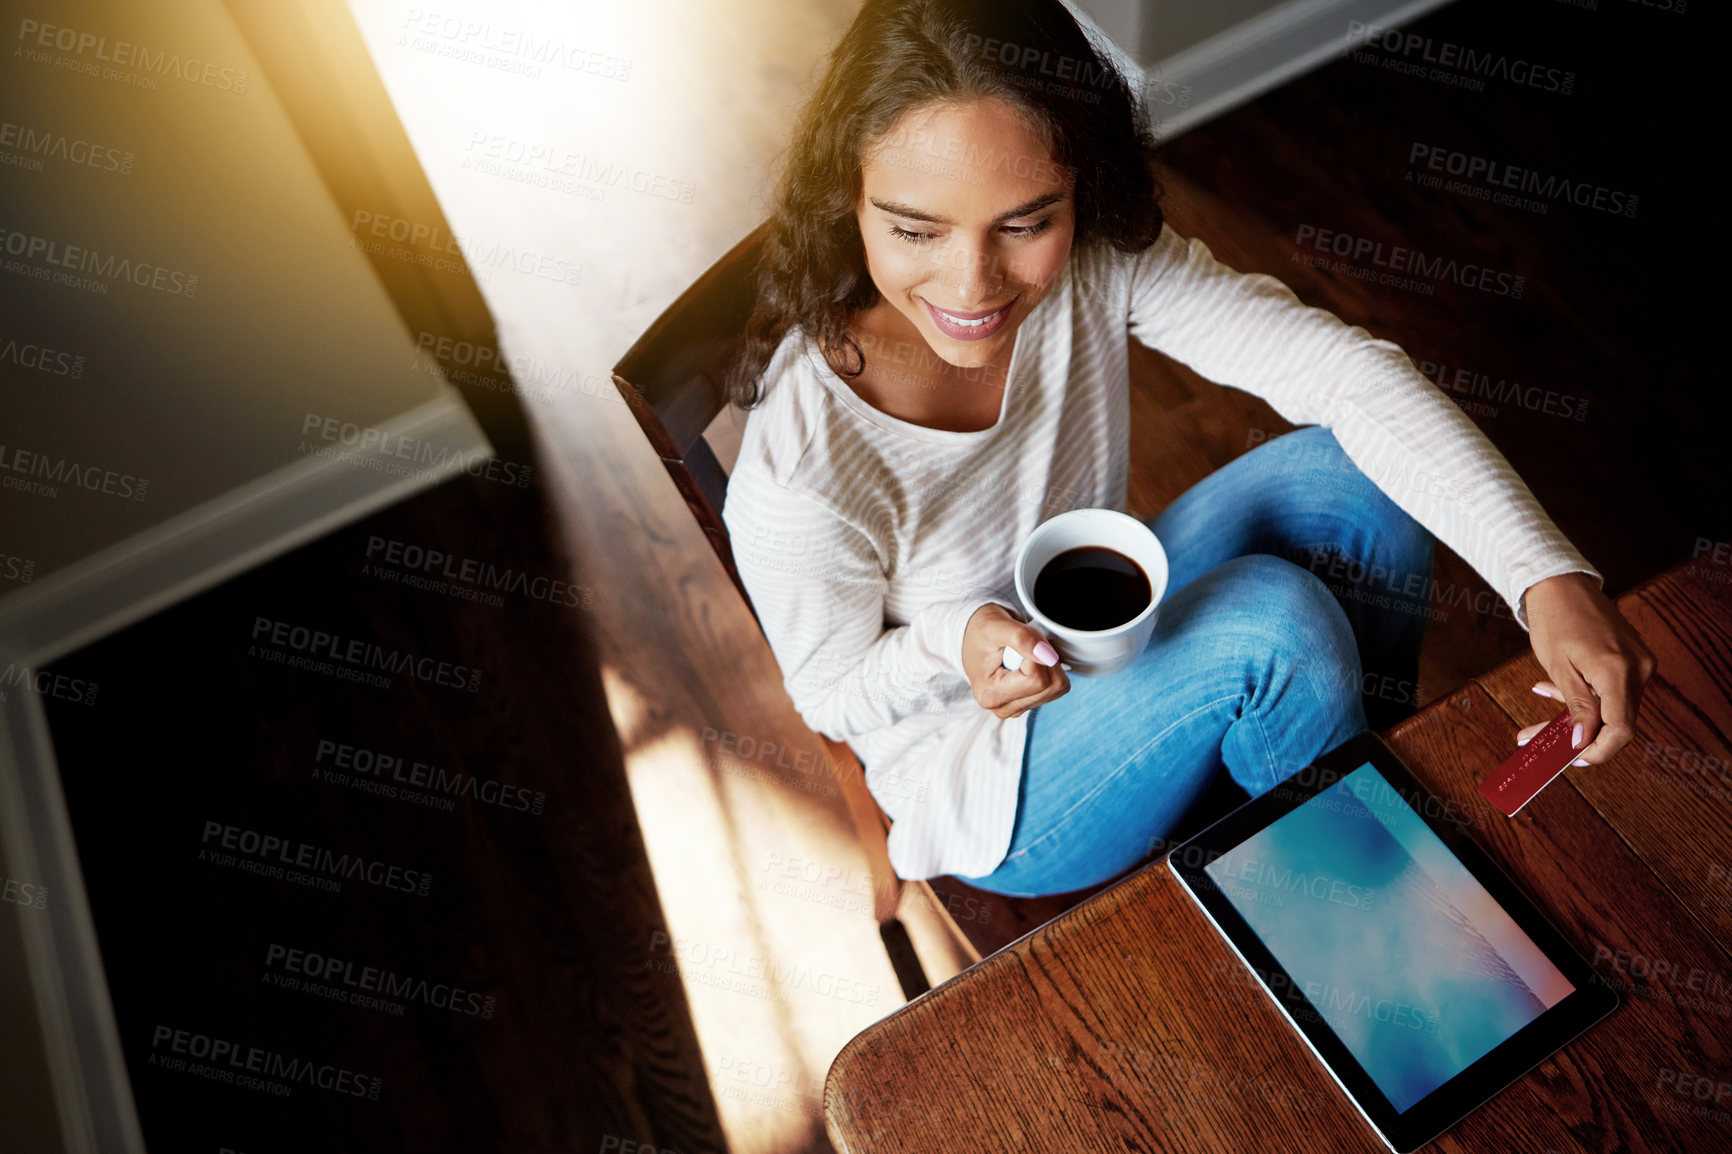 Buy stock photo High angle shot of a young woman drinking coffee and shopping online with her digital tablet at home